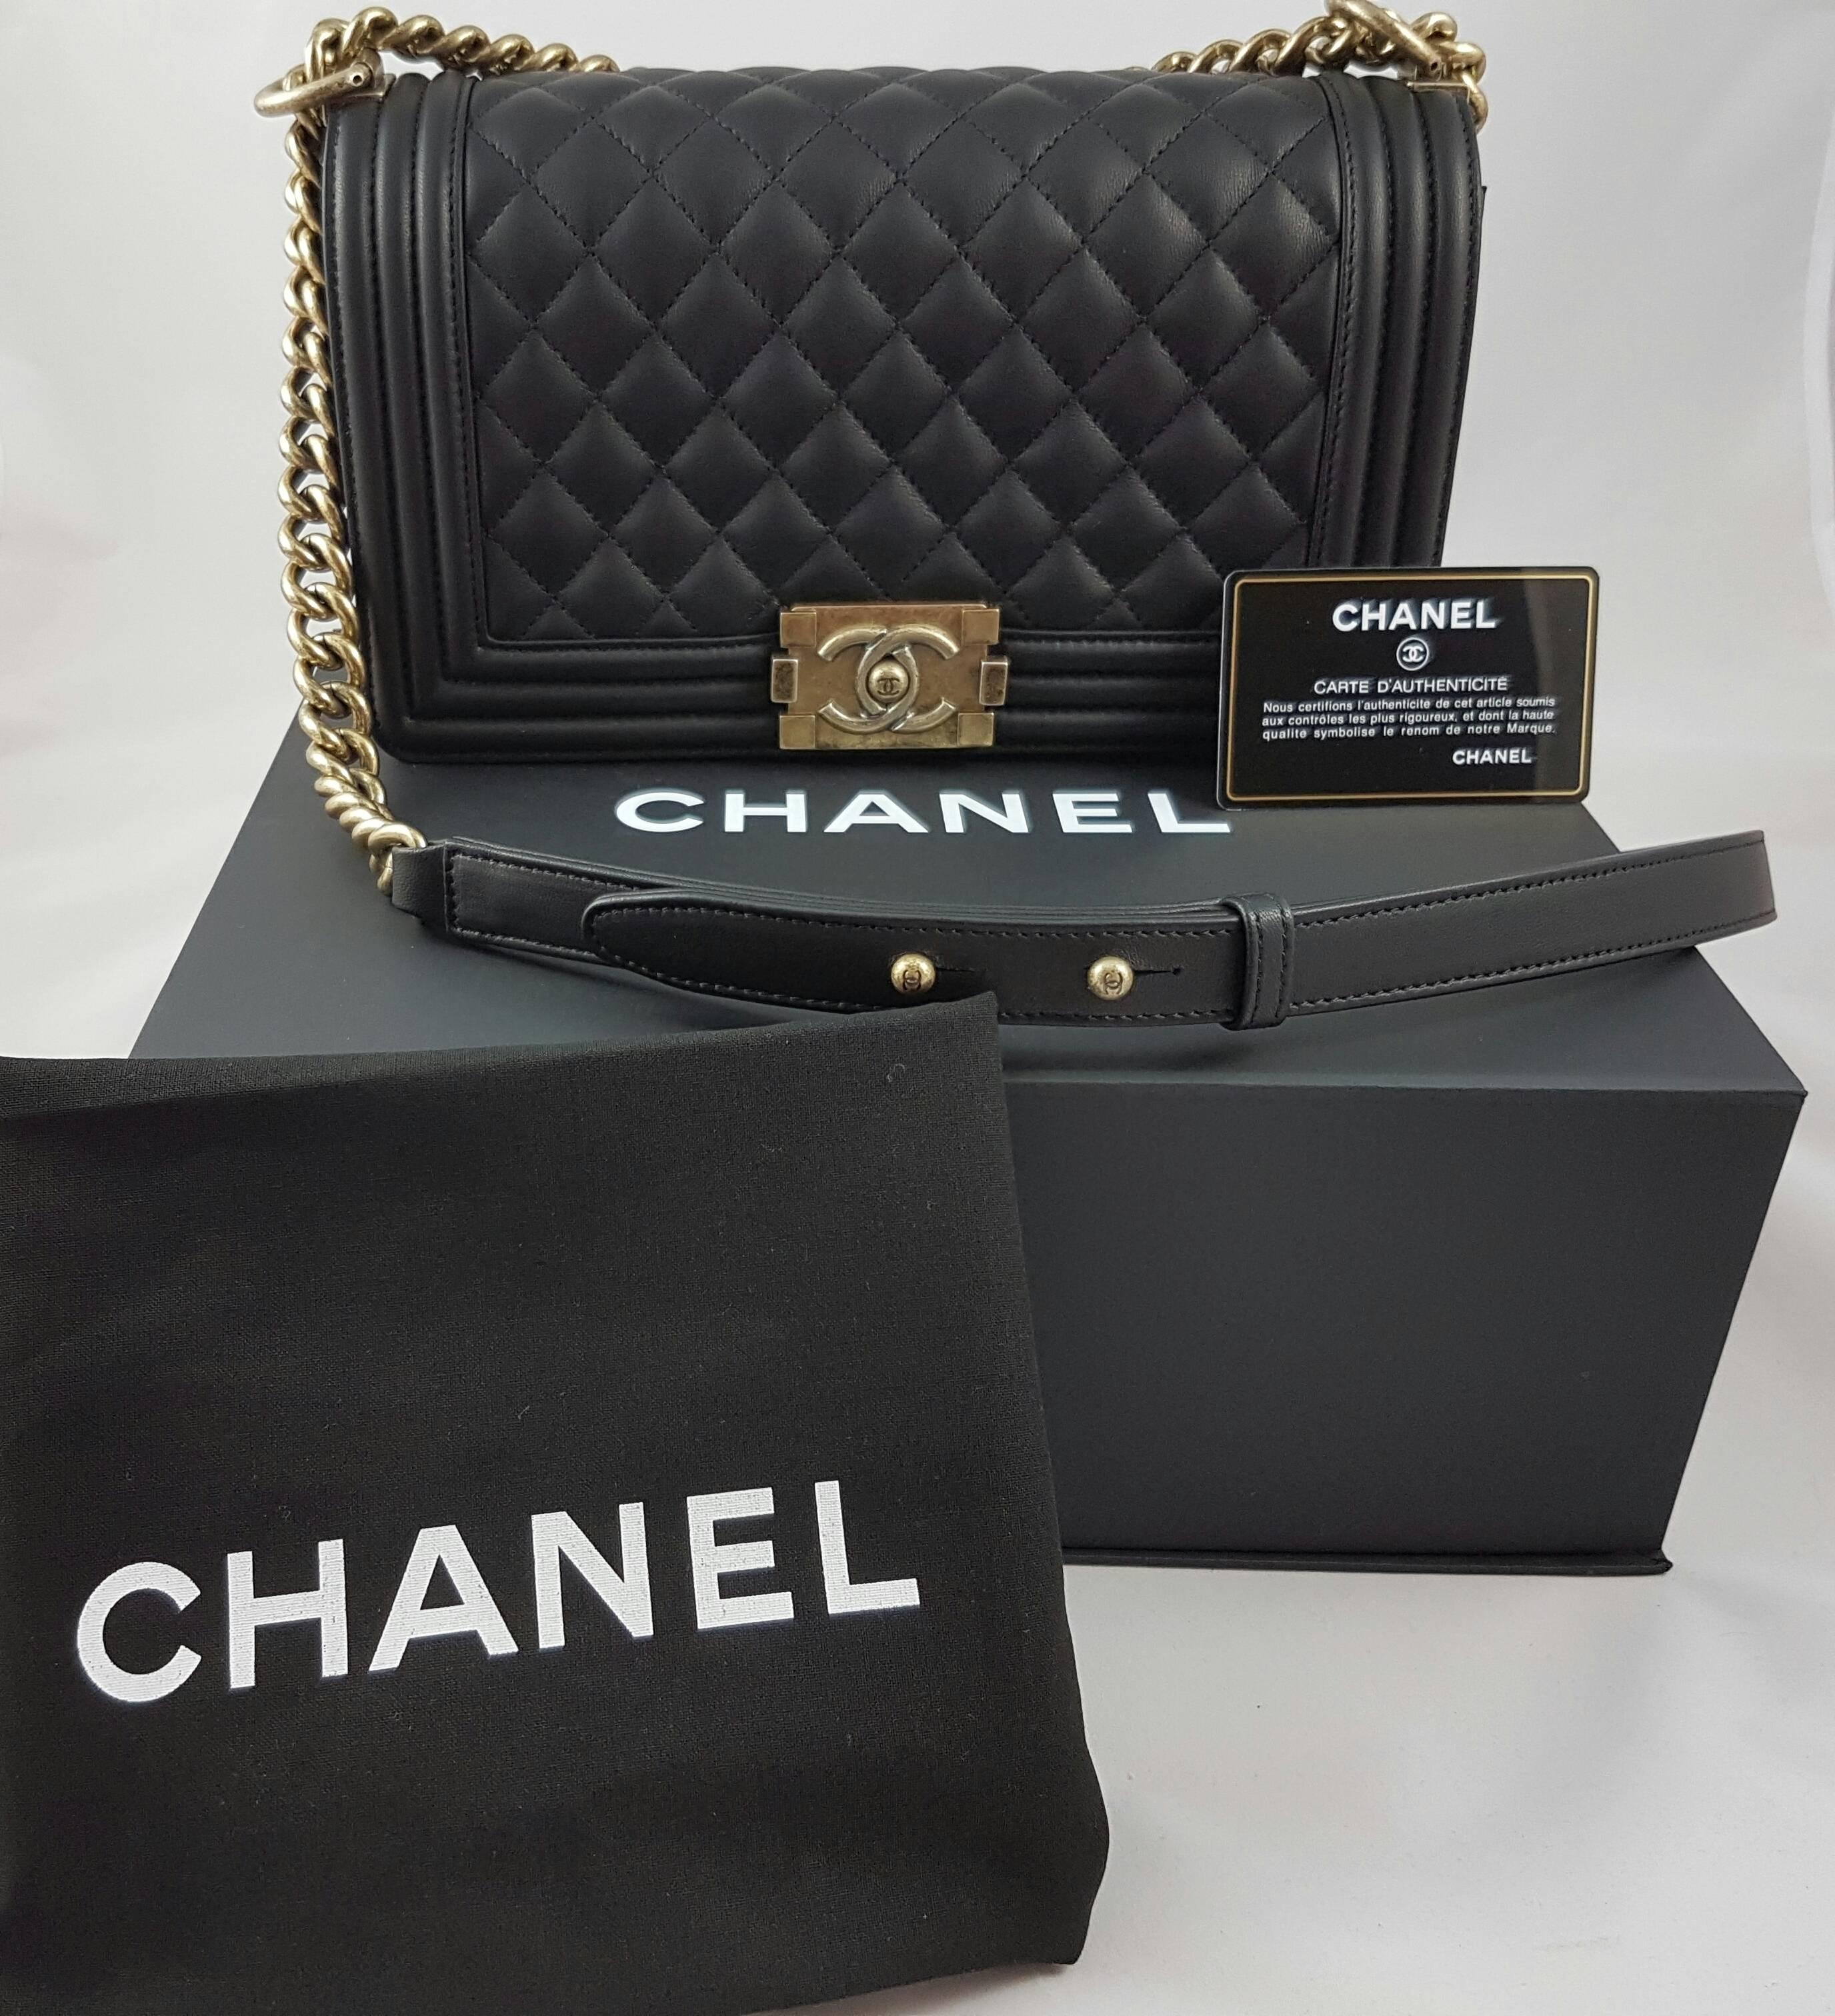 Chanel Medium Boy Bag Quilted Leather - Black with Gold Hardware 3